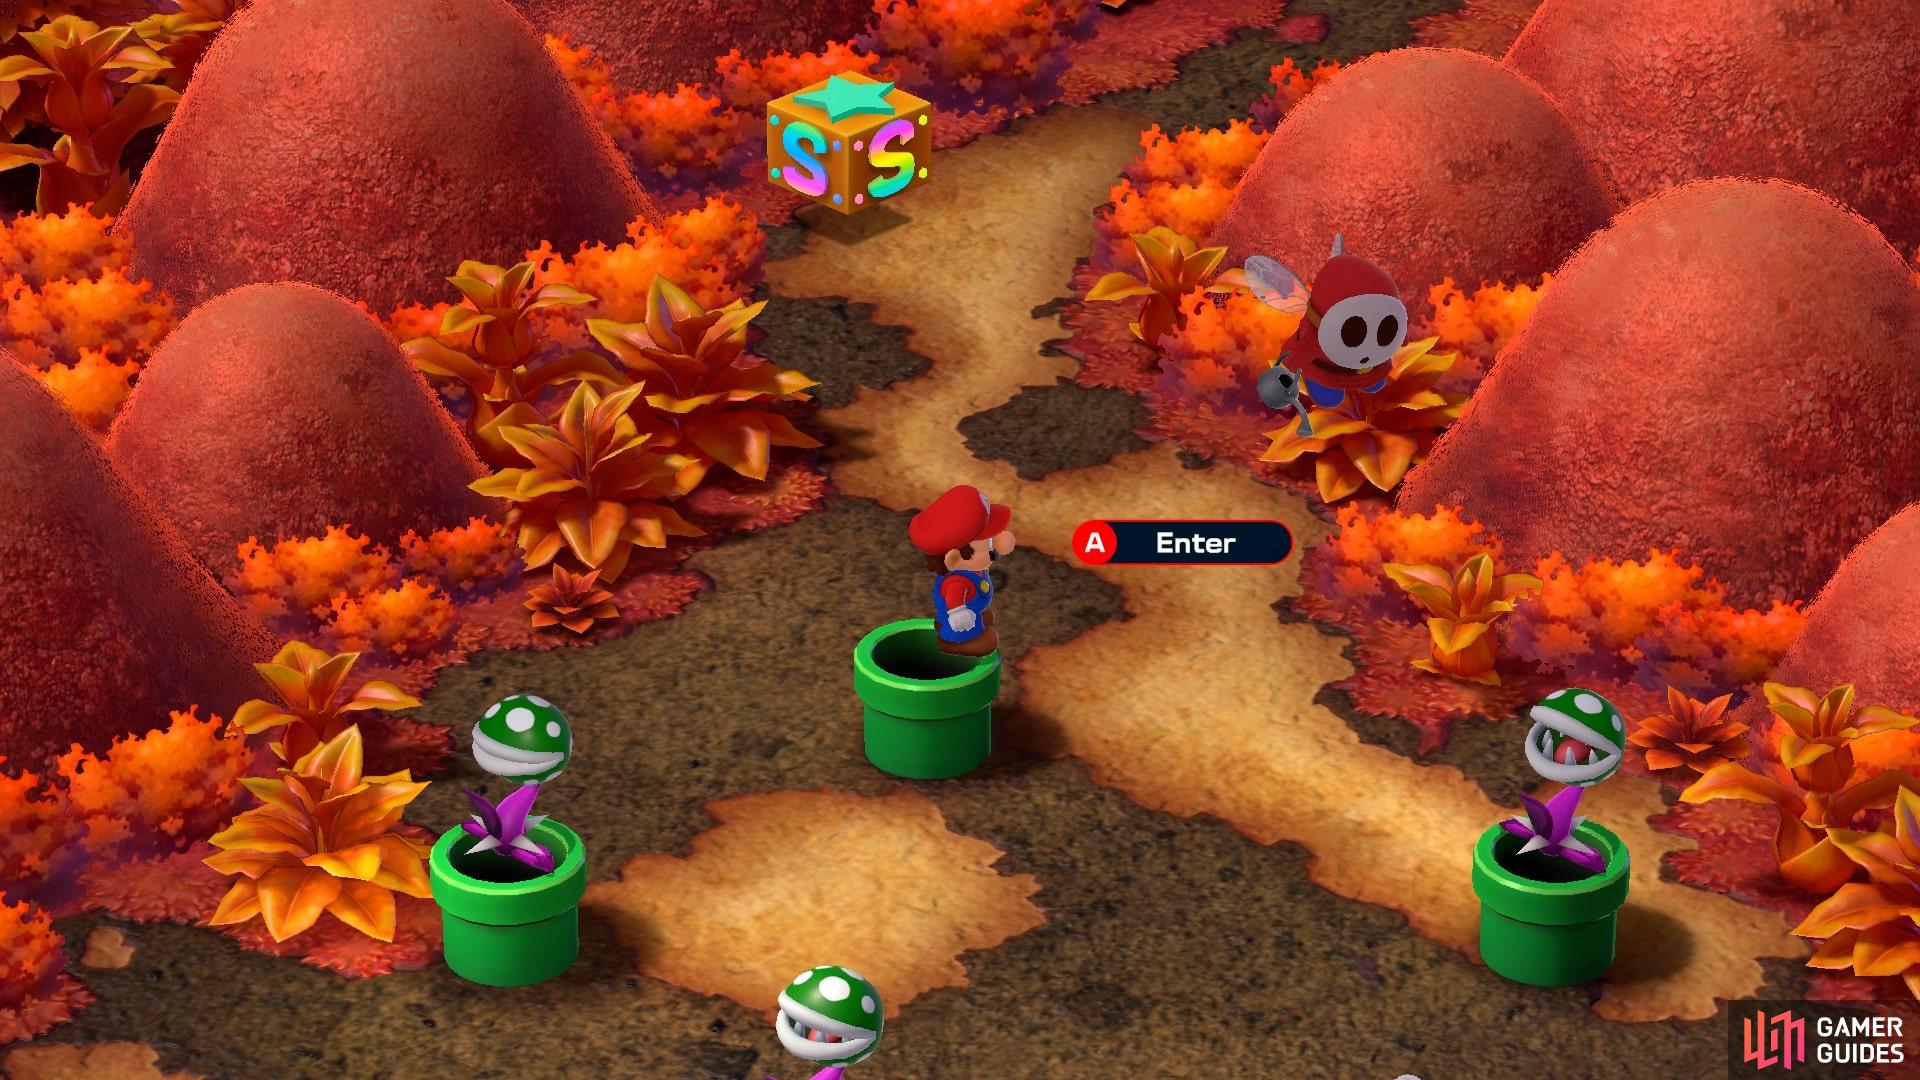 Defeat the Piranha Plant and use the pipe to enter the sewer area.